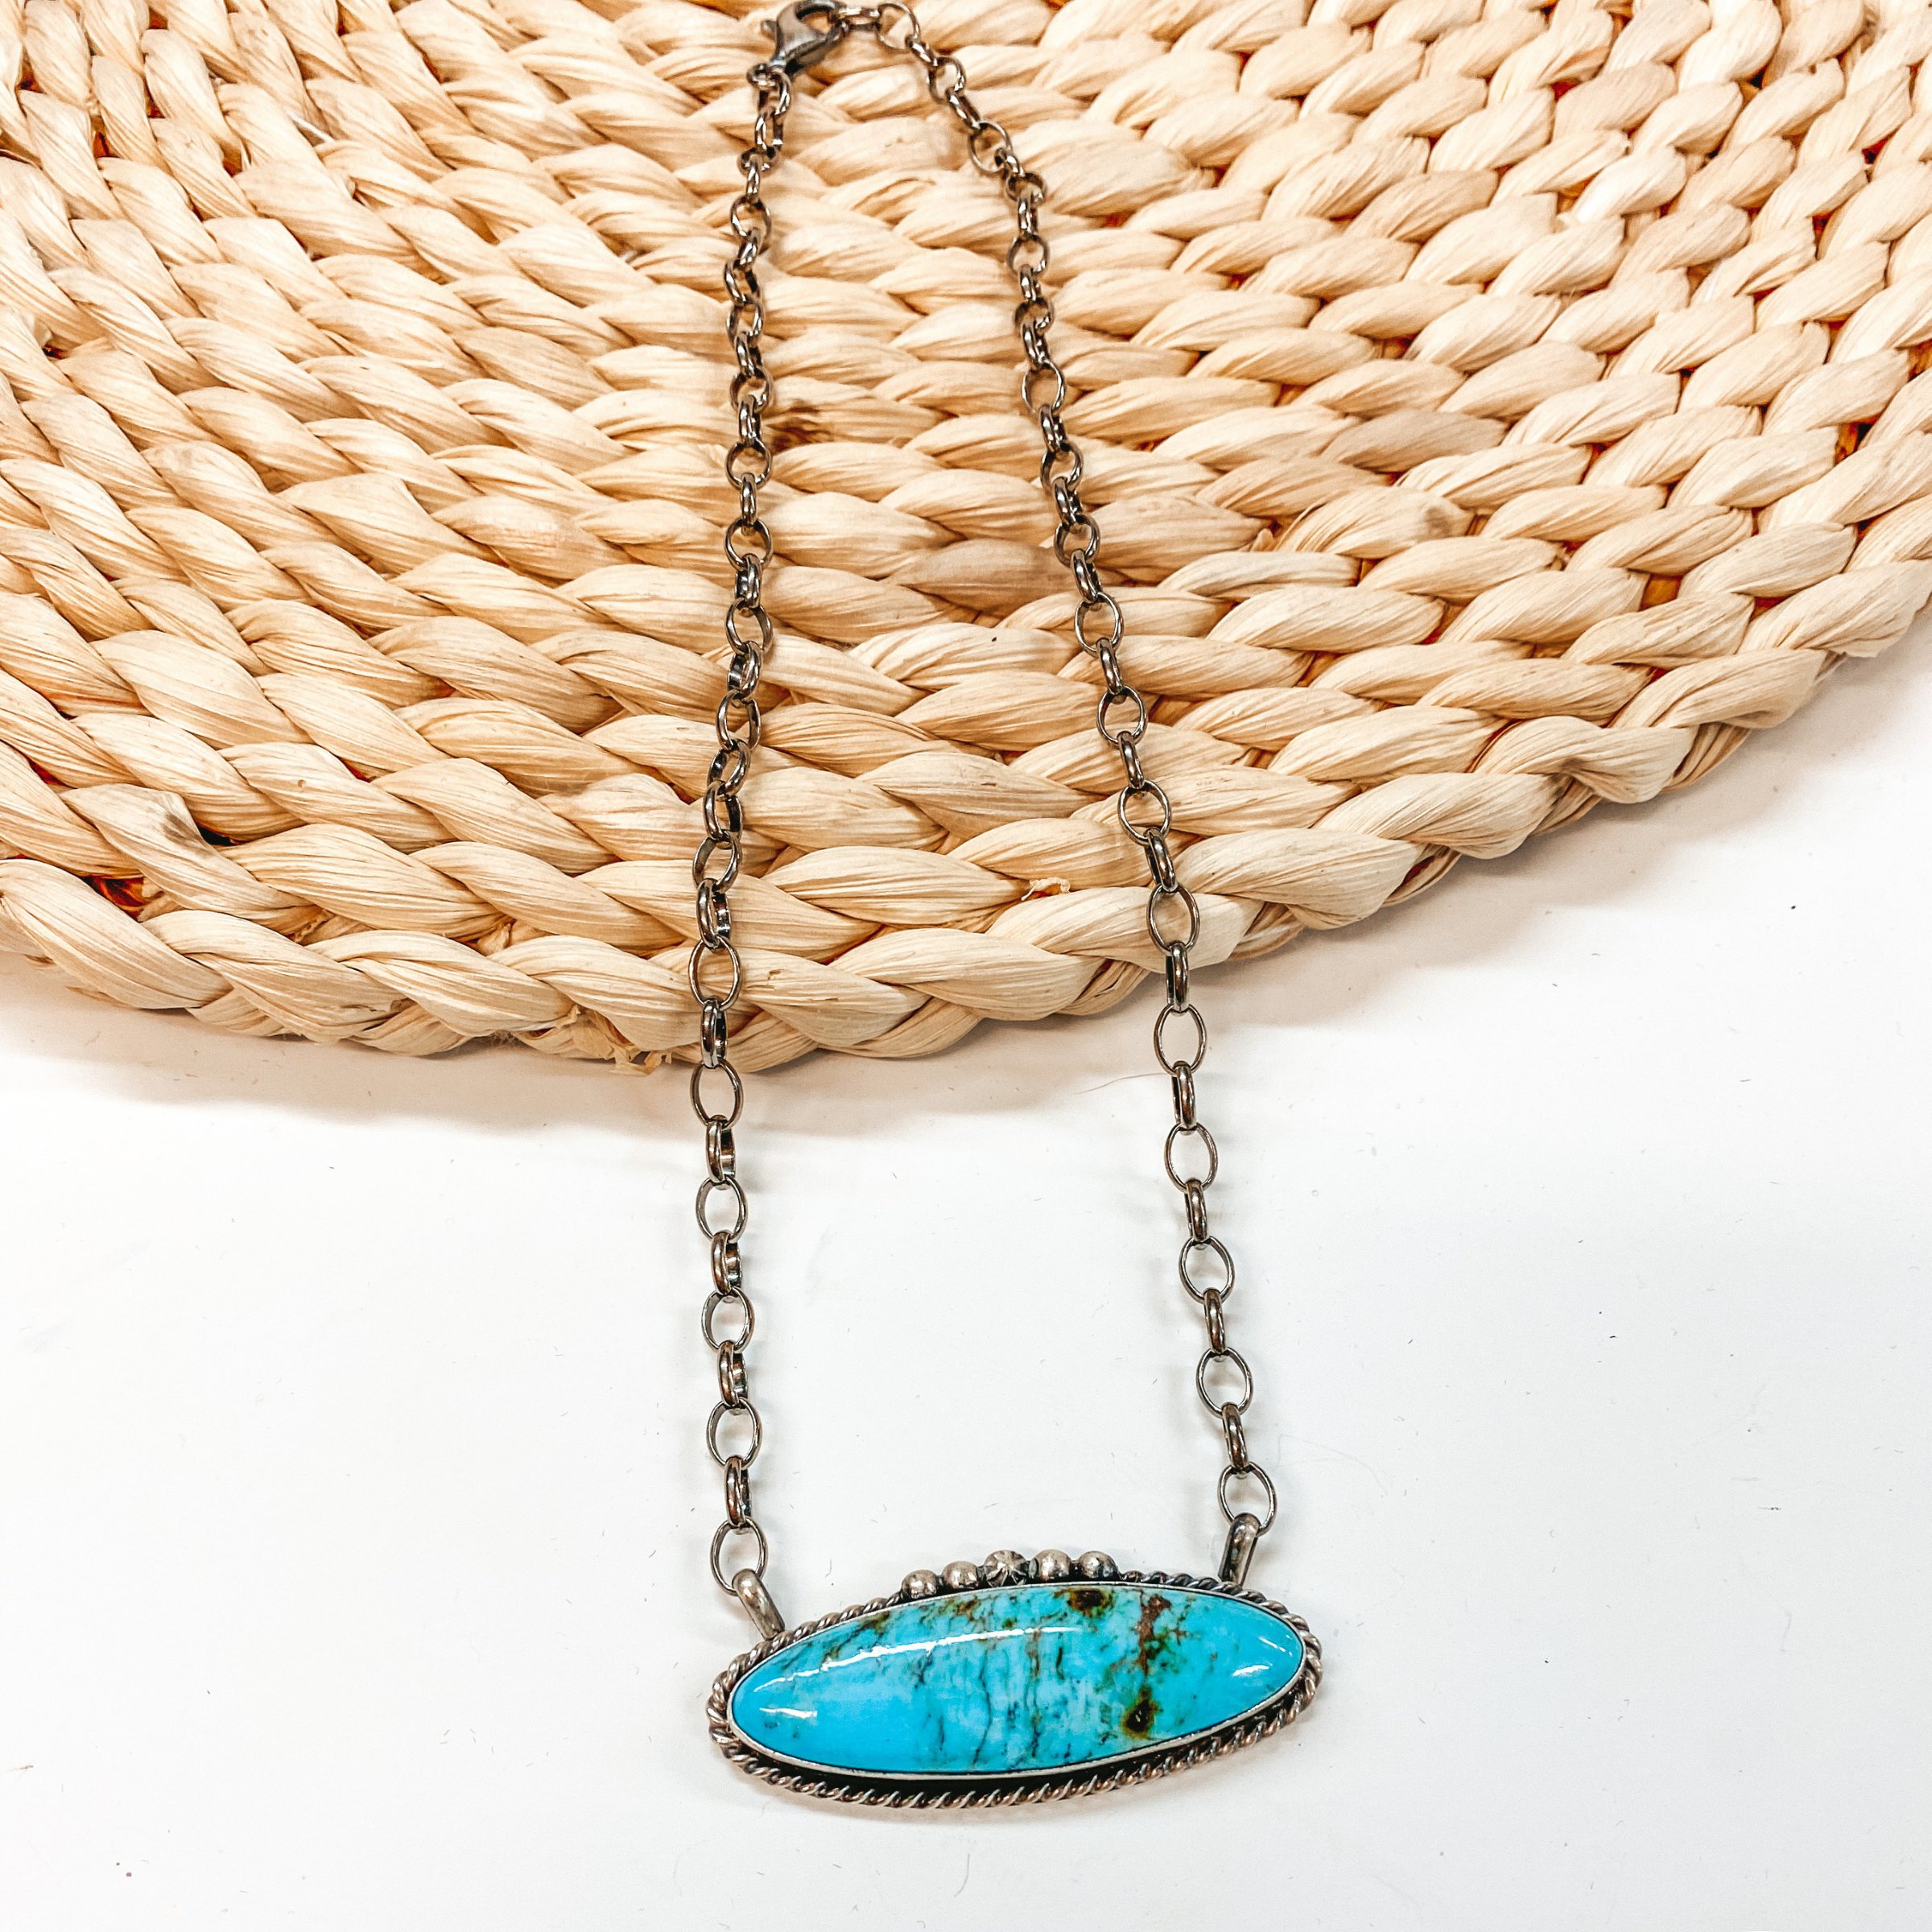 Augustine Largo | Navajo Handmade Sterling Silver Chain Necklace with Silverwork and Large Oval Kingman Turquoise Pendant - Giddy Up Glamour Boutique